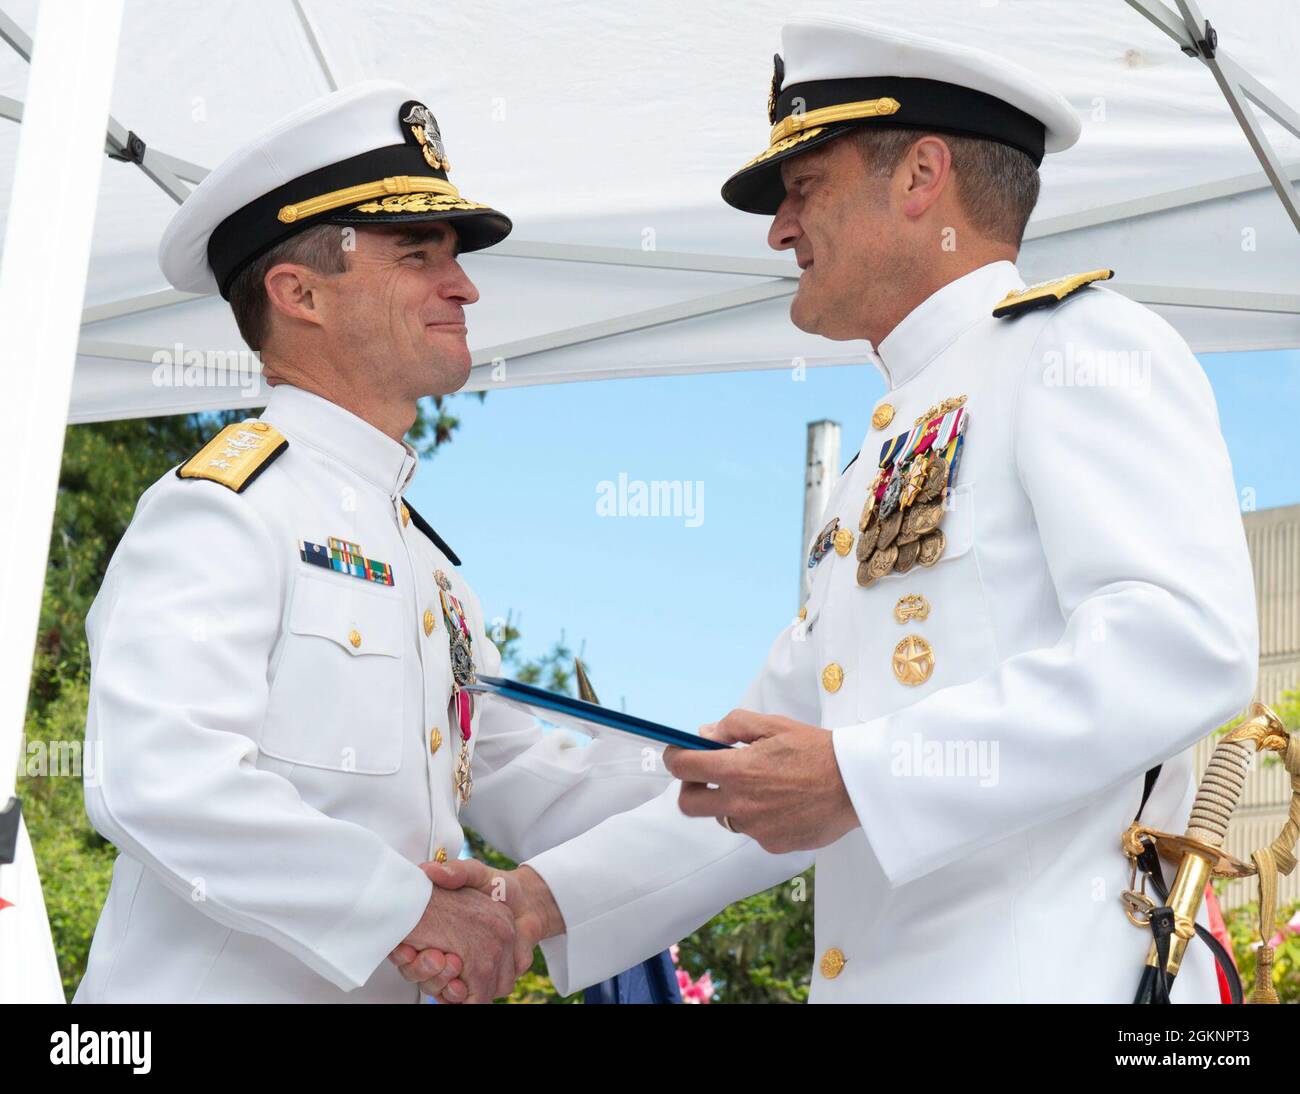 SILVERDALE, Wash. - Rear Adm. Douglas Perry, left, receives the Legion of Merit from Rear Adm. Jeffrey Jablon, right, during the Commander, Submarine Group 9 Change of Command ceremony held at Deterrent Park, Naval Base Kitsap-Bangor, June 8. Subordinate to Commander, Submarine Force, U.S. Pacific Fleet, COMSUBGRU- 9 exercises administrative, tactical and operational command and control authority for assigned Trident fleet ballistic and cruise missile submarines and subordinate commands and units in the Pacific Northwest. Subordinate commands include Submarine Squadrons 17 and 19, and Naval Su Stock Photo